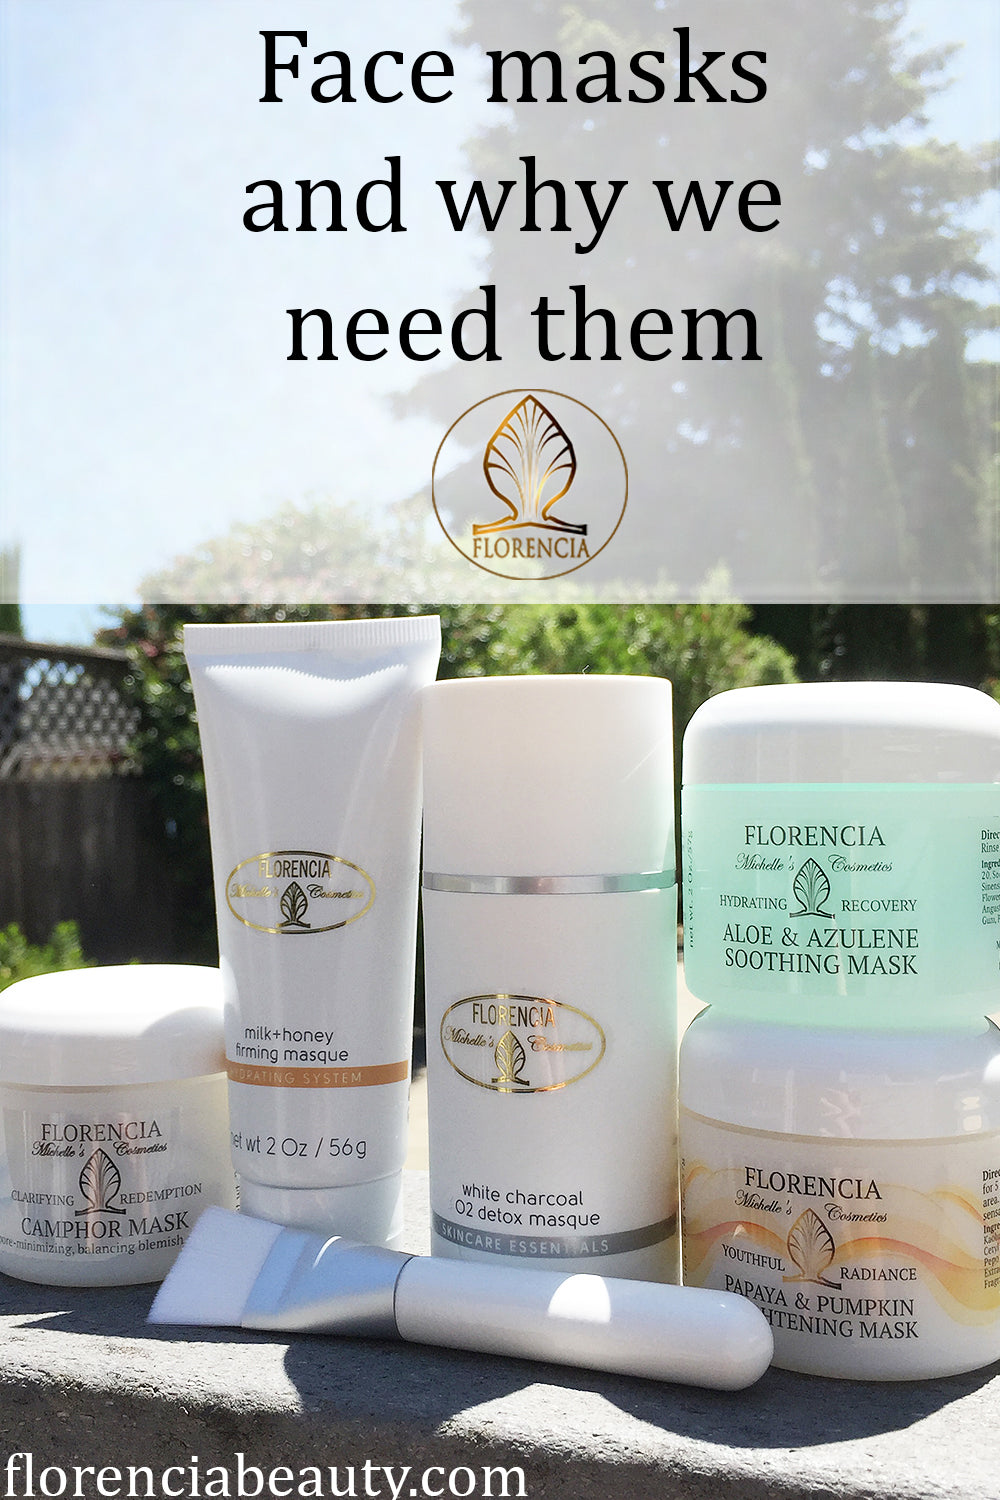  Florencia Beauty Blog Face masks and why we need them.